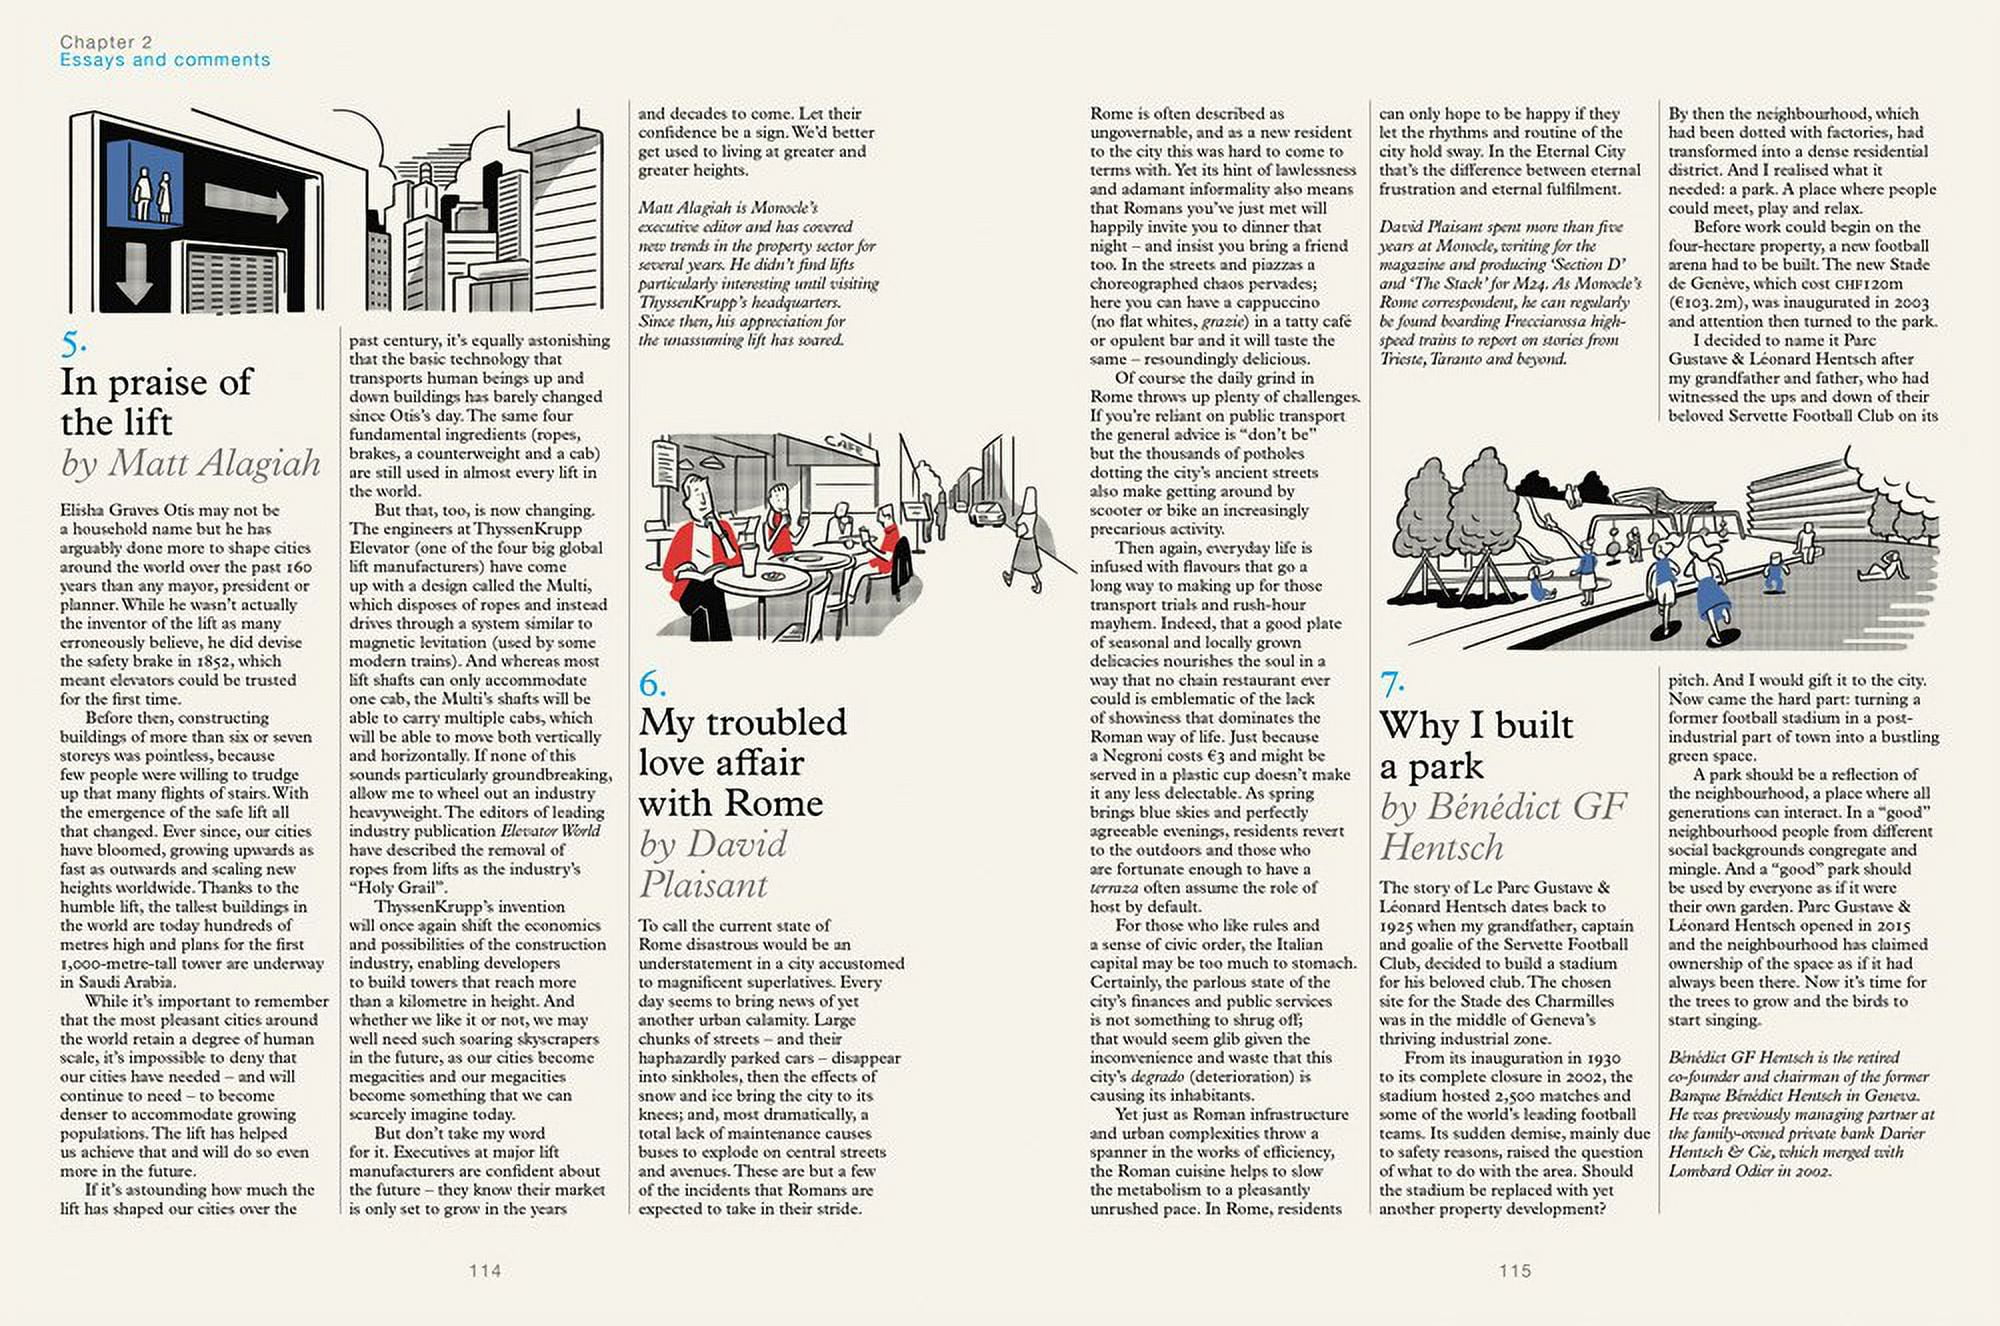 The Monocle Guide to Building Better Cities